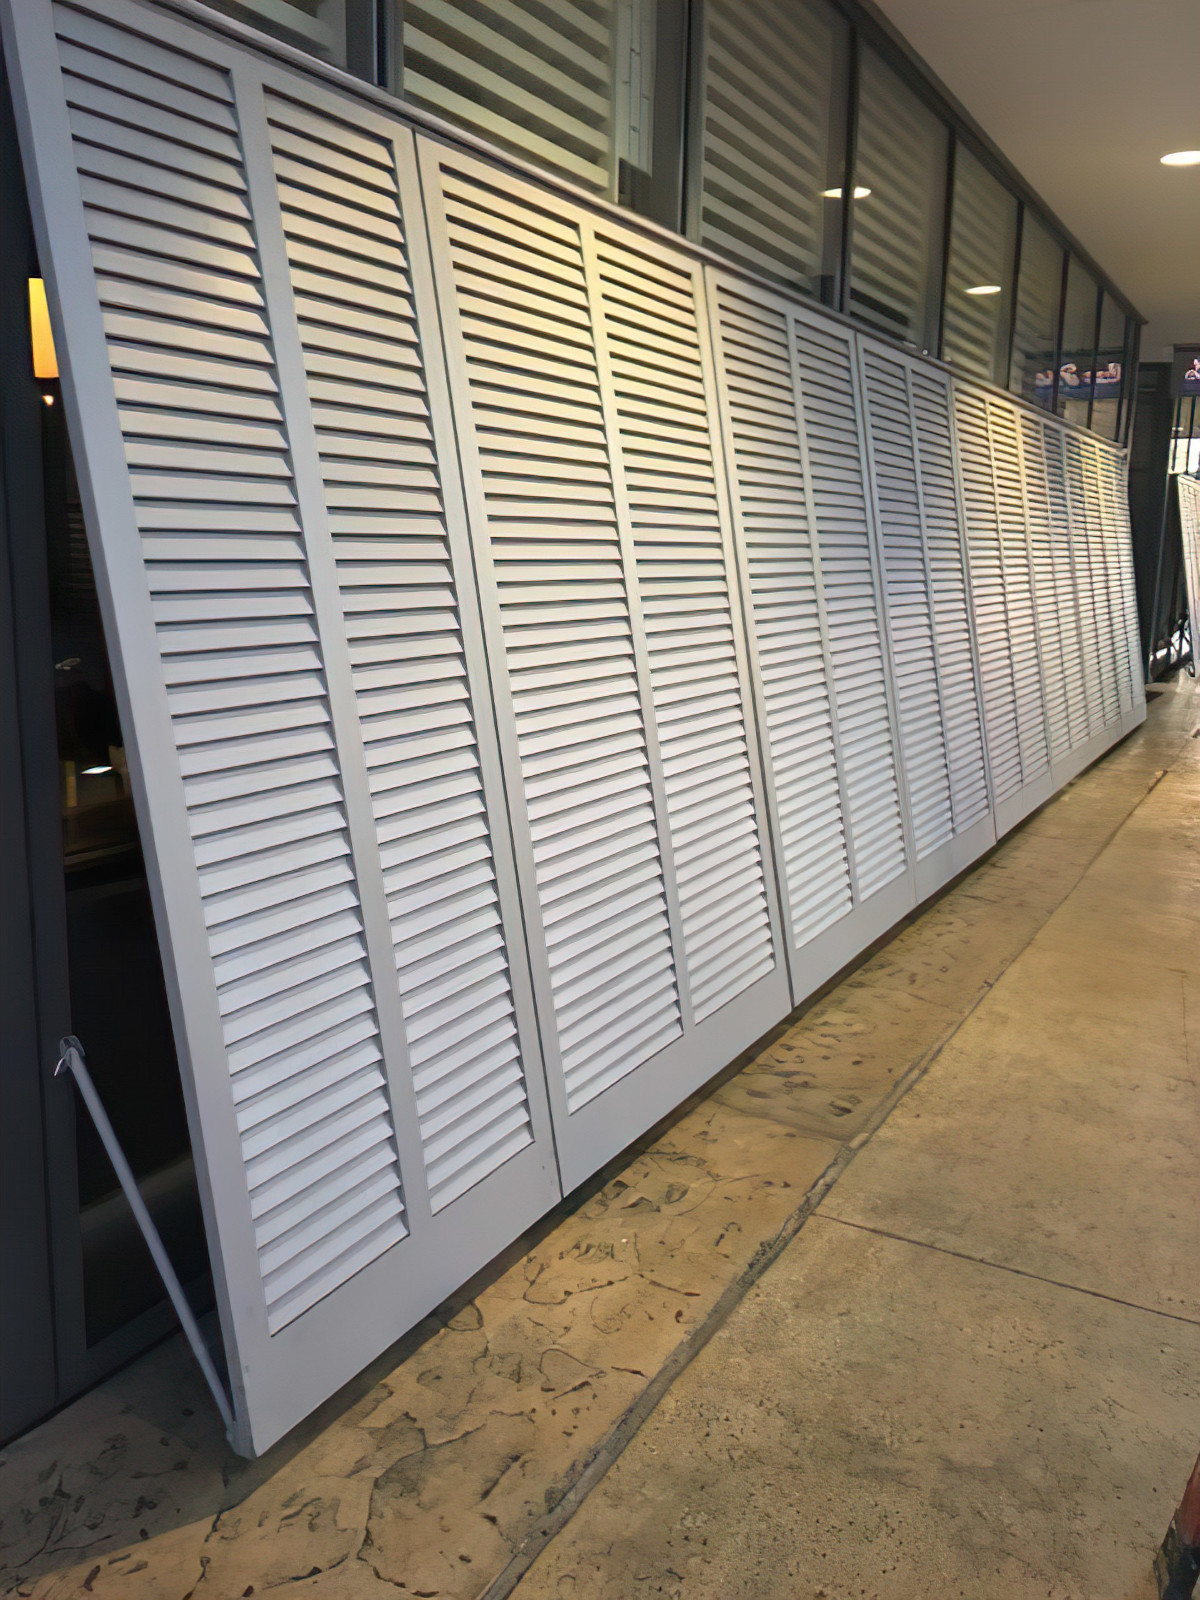 fixed louver plantation shutters for privacy at a restaurant